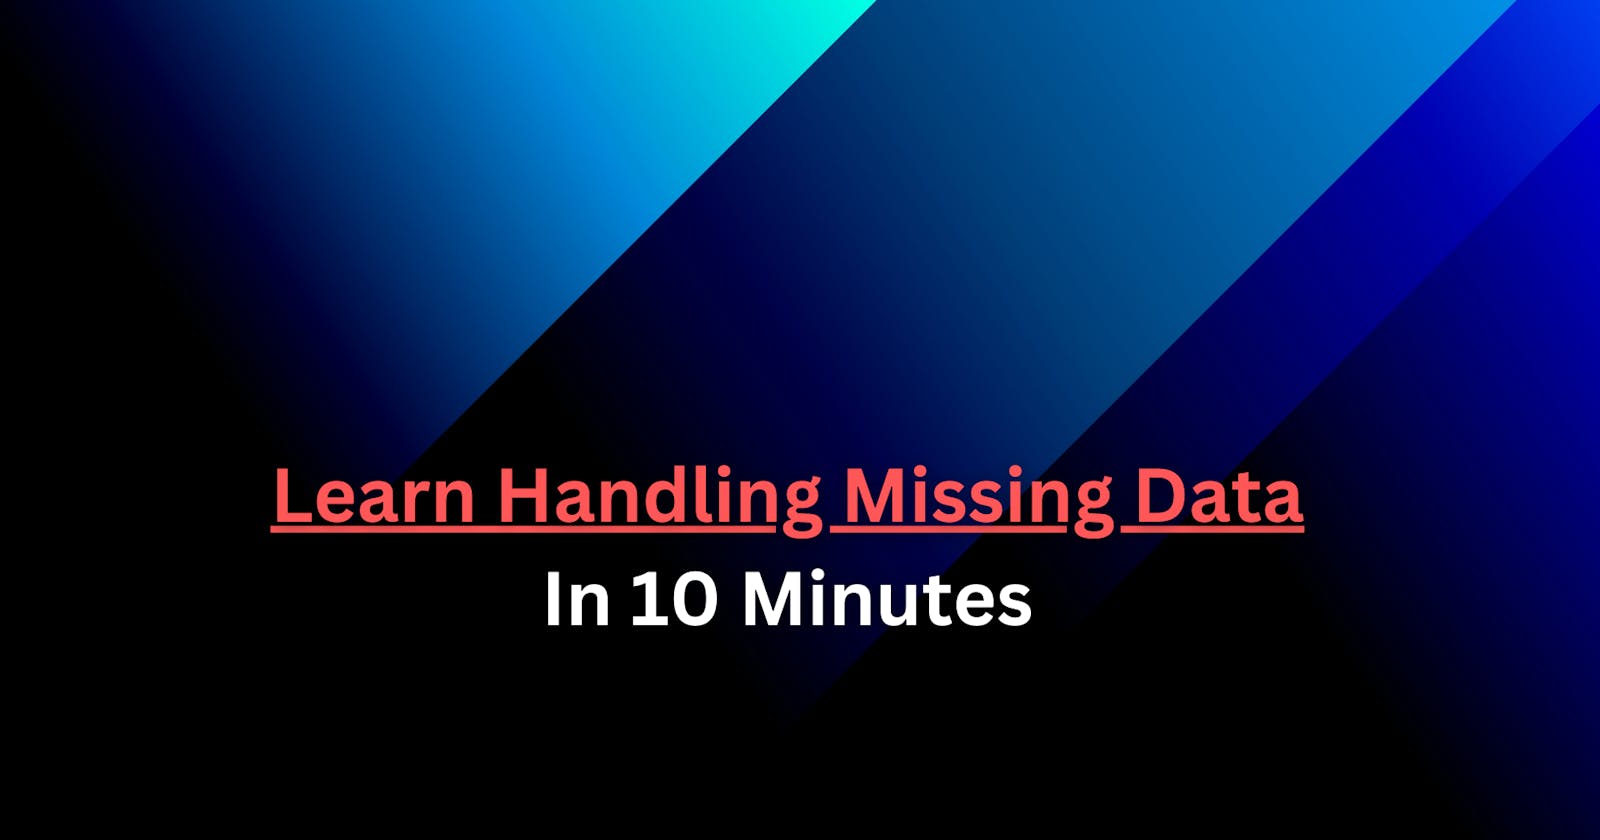 Learn Handling Missing Data in 10 Minutes